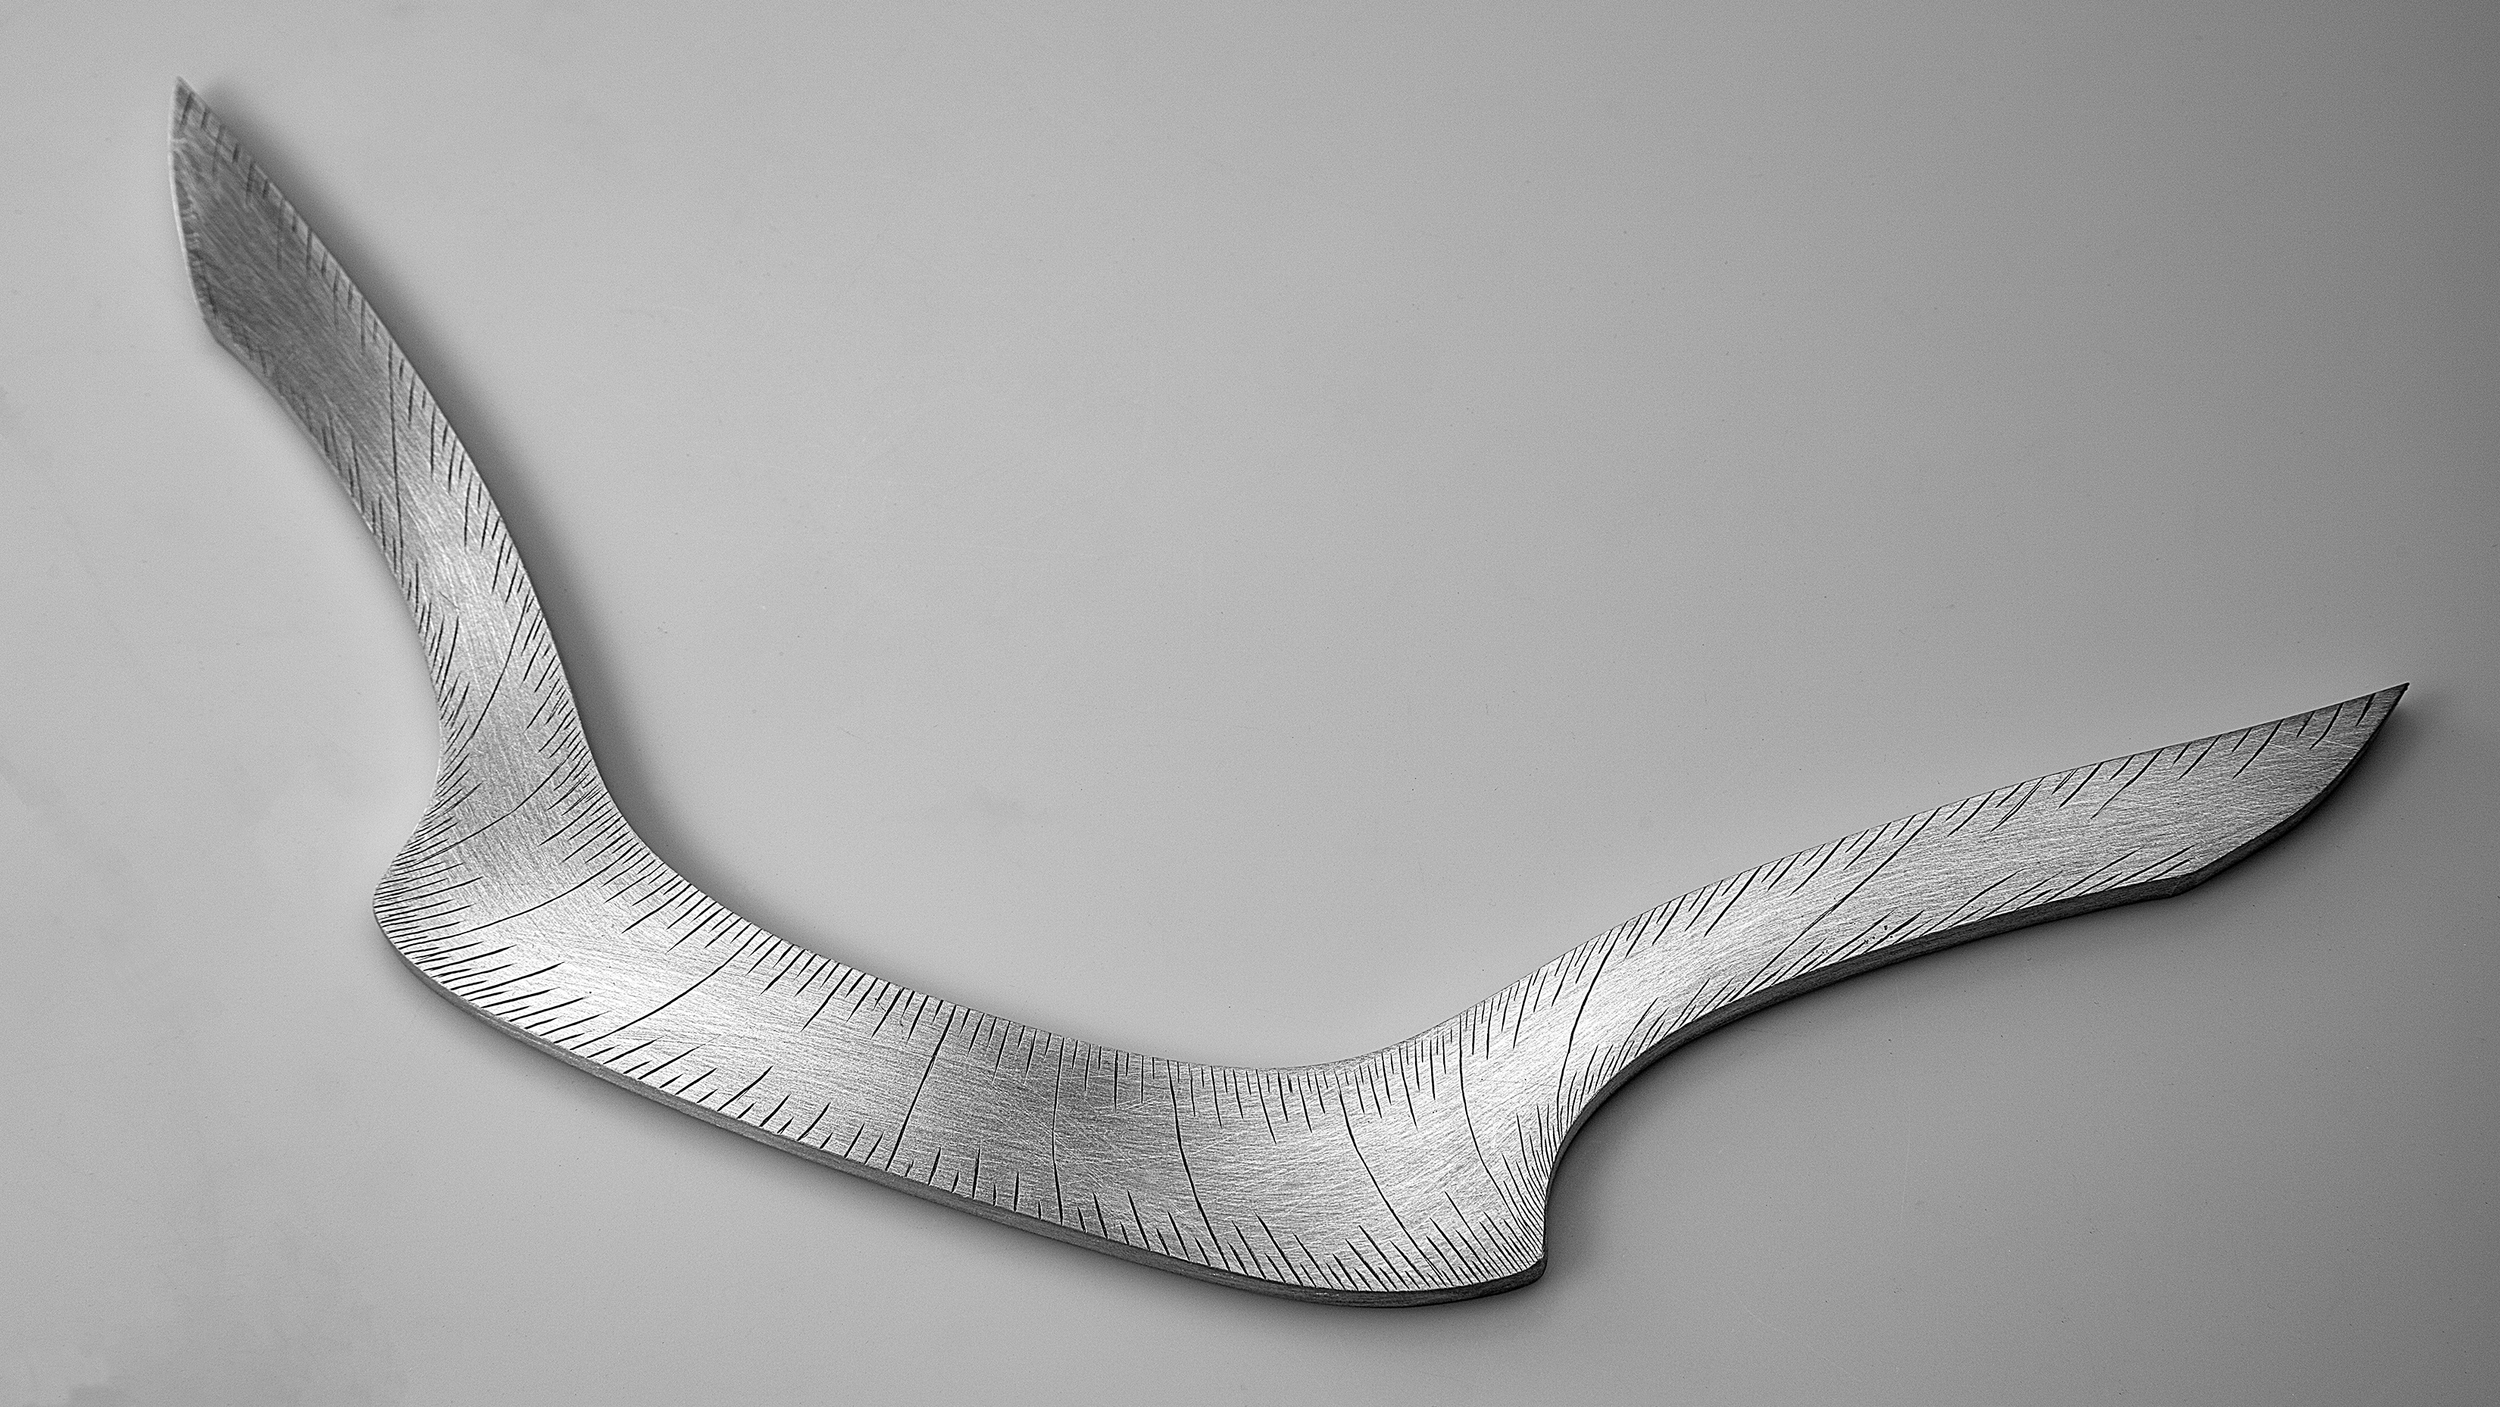 Instrument #112, hand engraved aluminum and ink, 12" x 4.5" x .25"